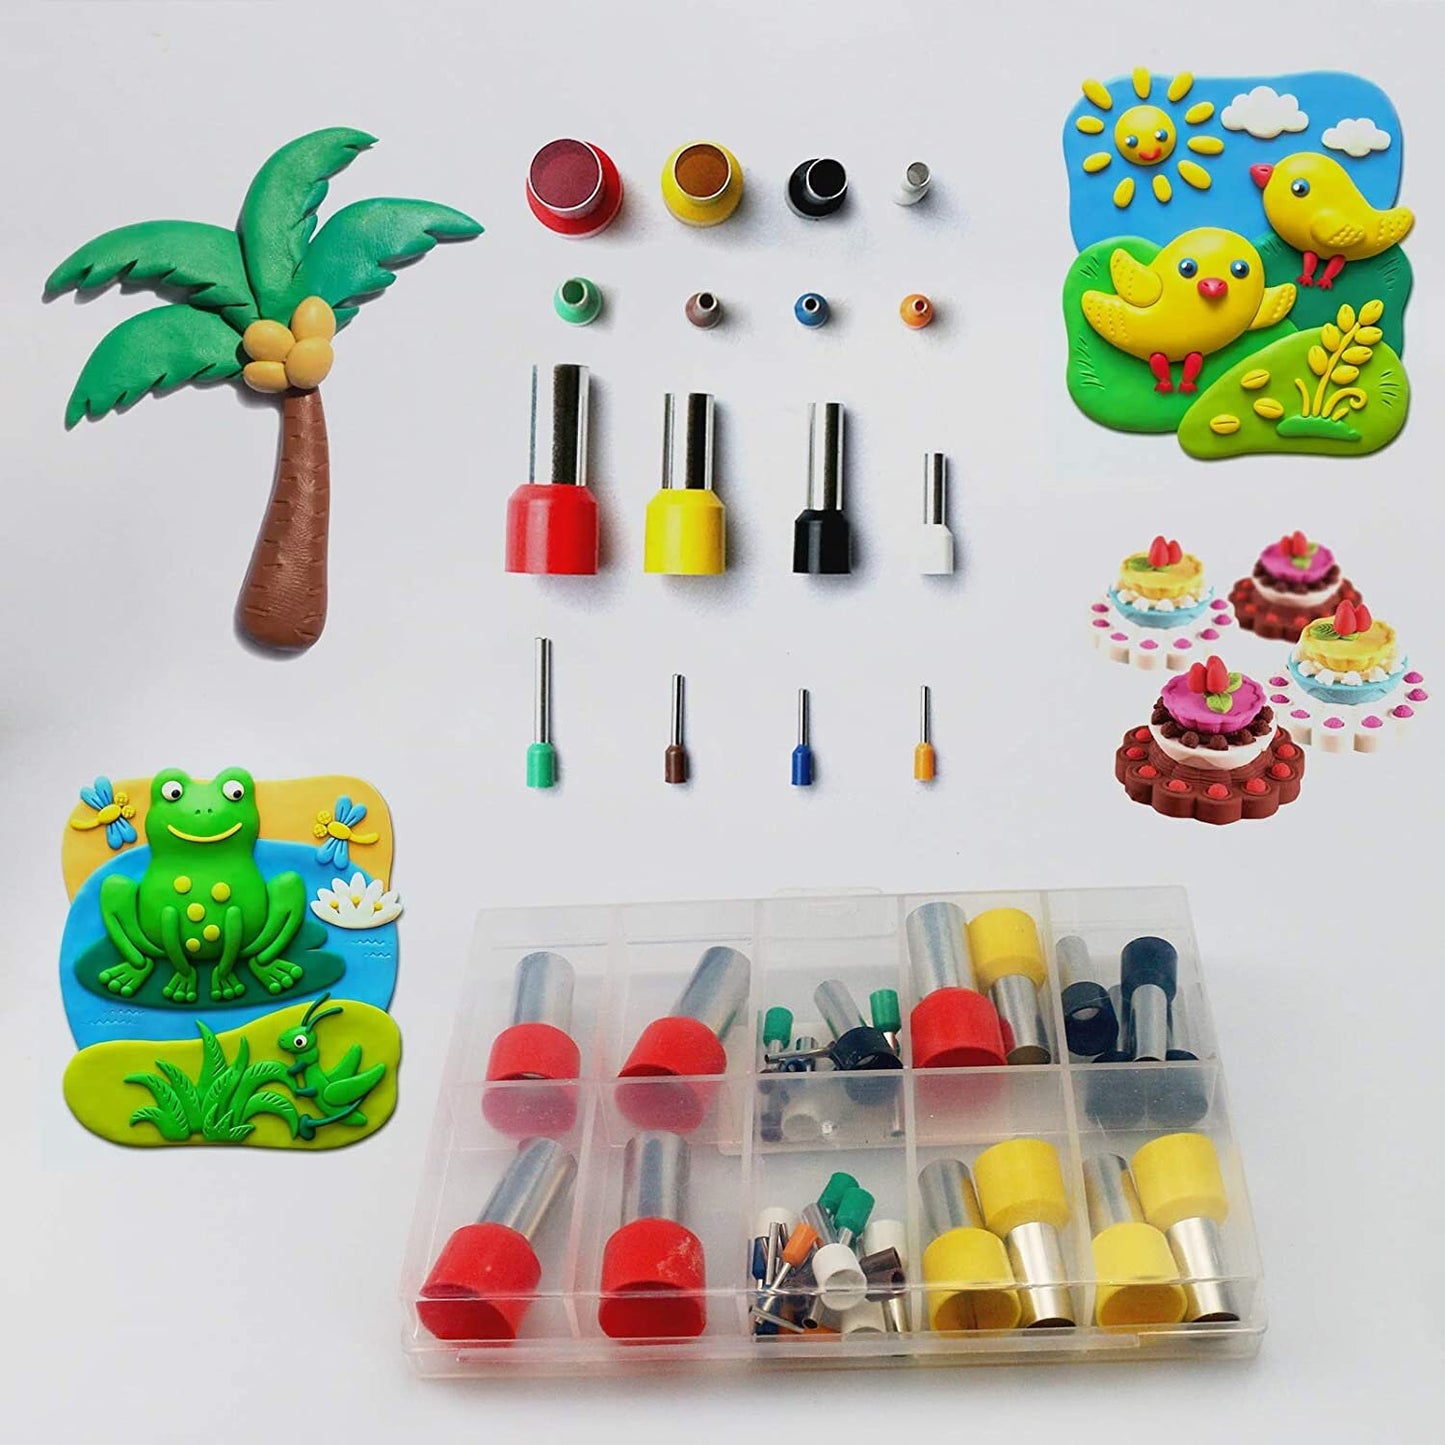 Polymer Clay Tool Kit with Polymer Clay - 86 piece Clay beginner set for making figurines, beads, clay pins, and more